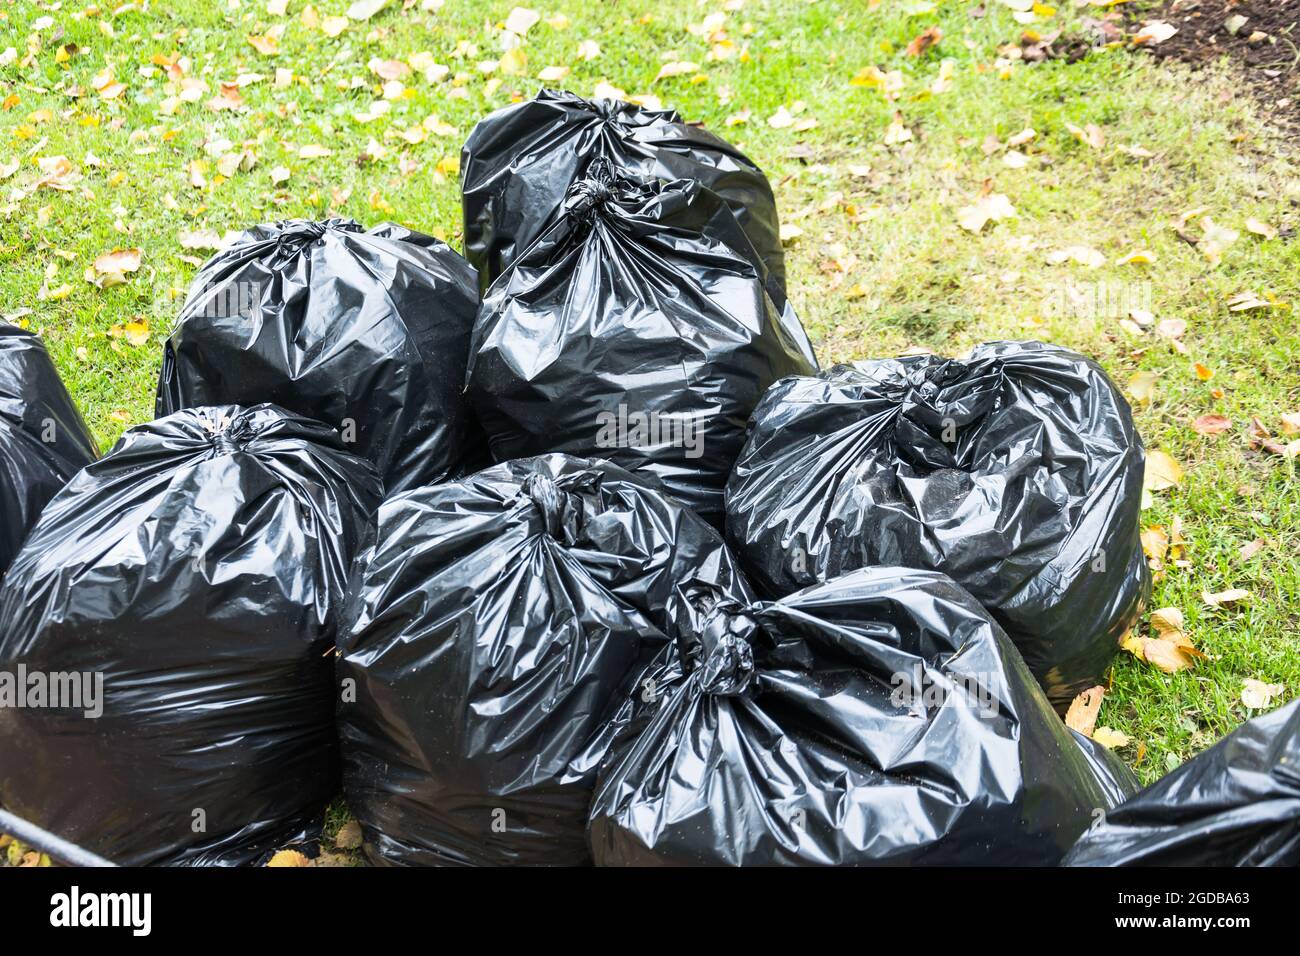 Black trash bags in the park in early autumn Stock Photo